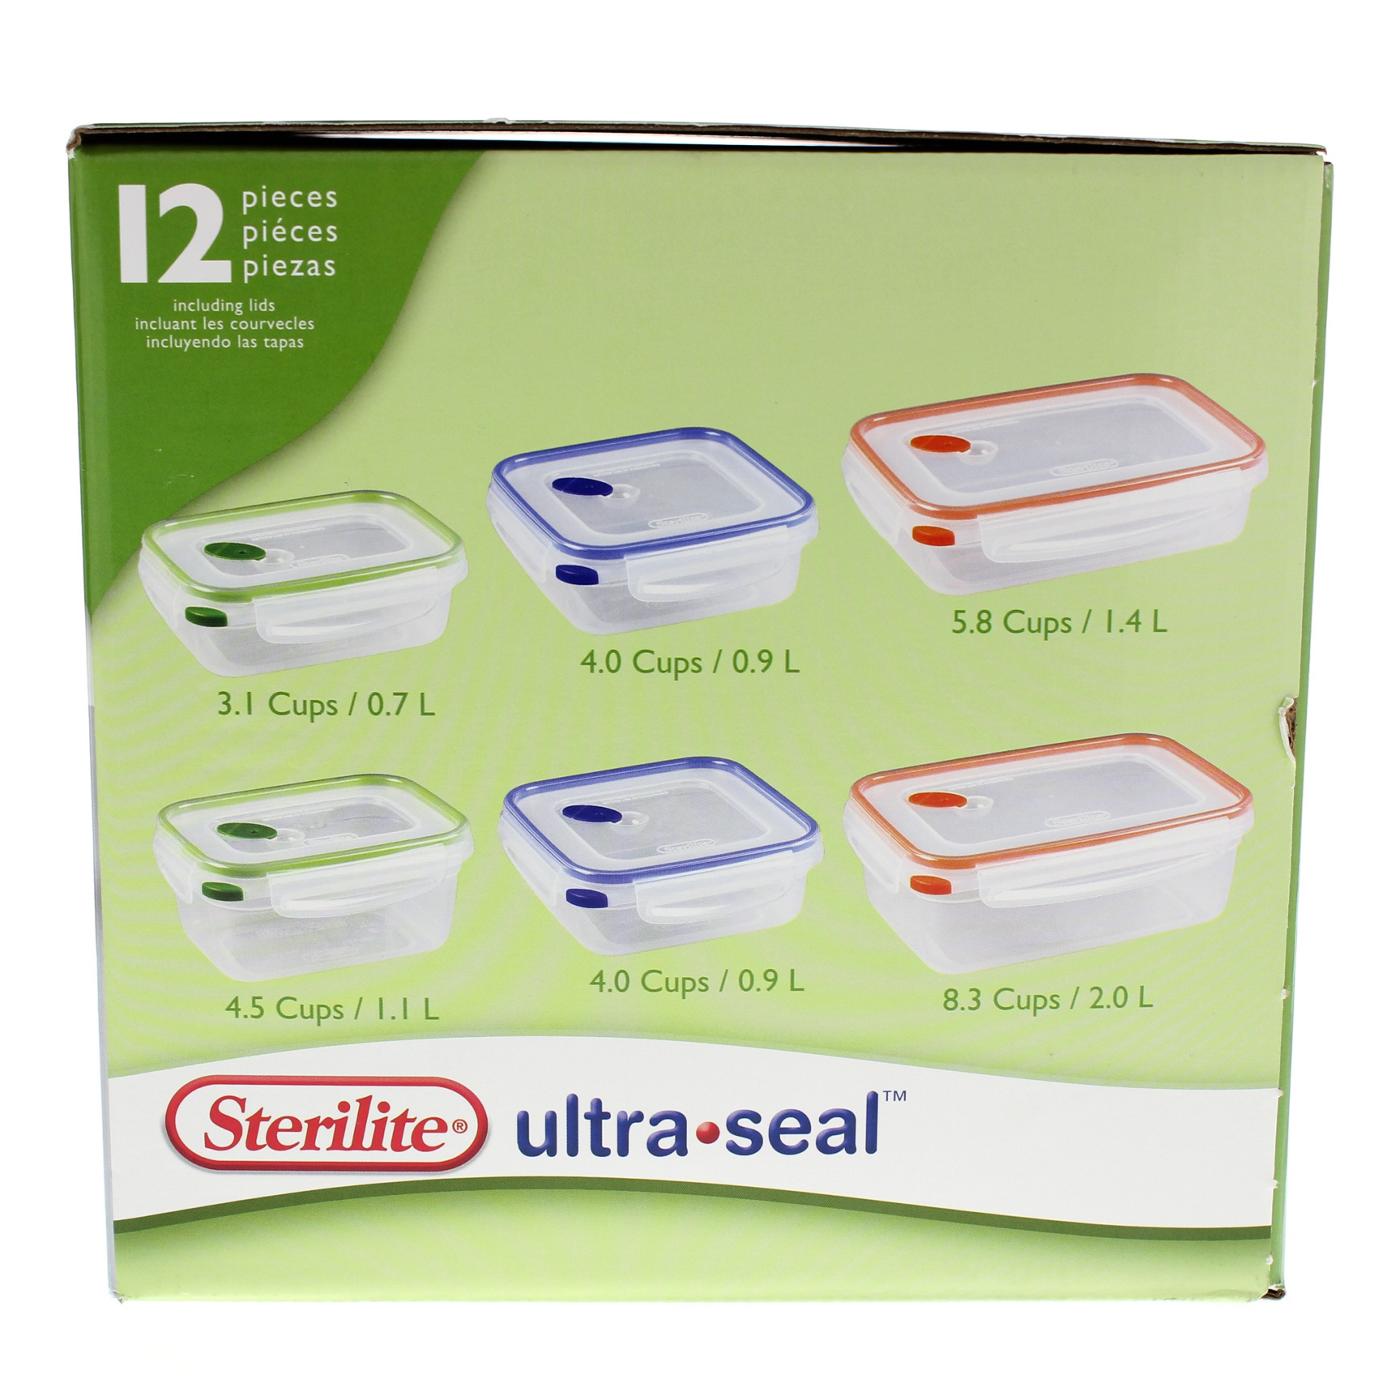 Sterilite UltraSeal Food Storage Containers, 12 Piece Set; image 2 of 3